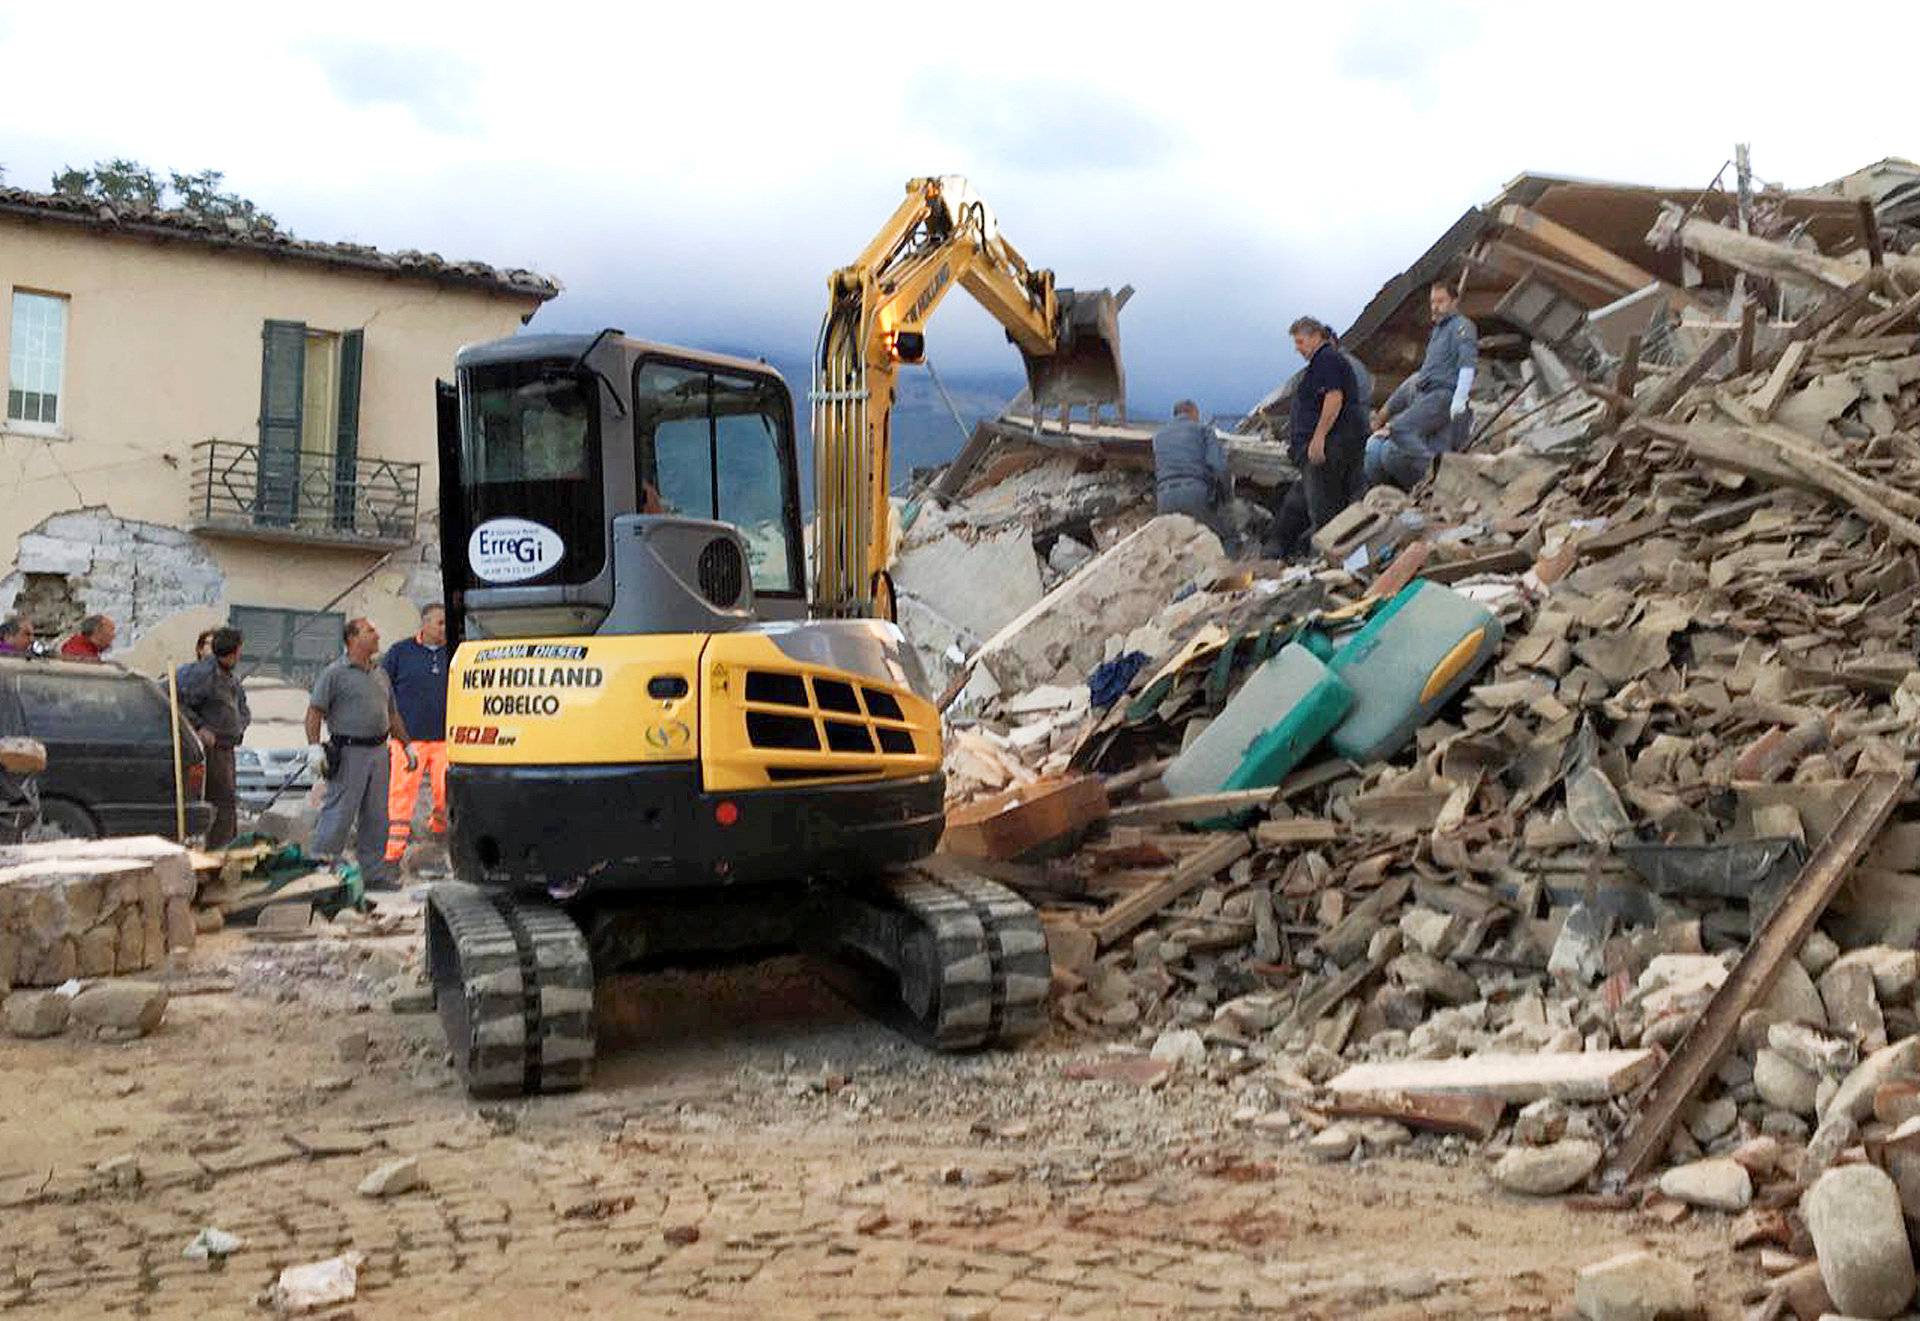 Rescuers work at a collapsed house following a quake in Amatrice